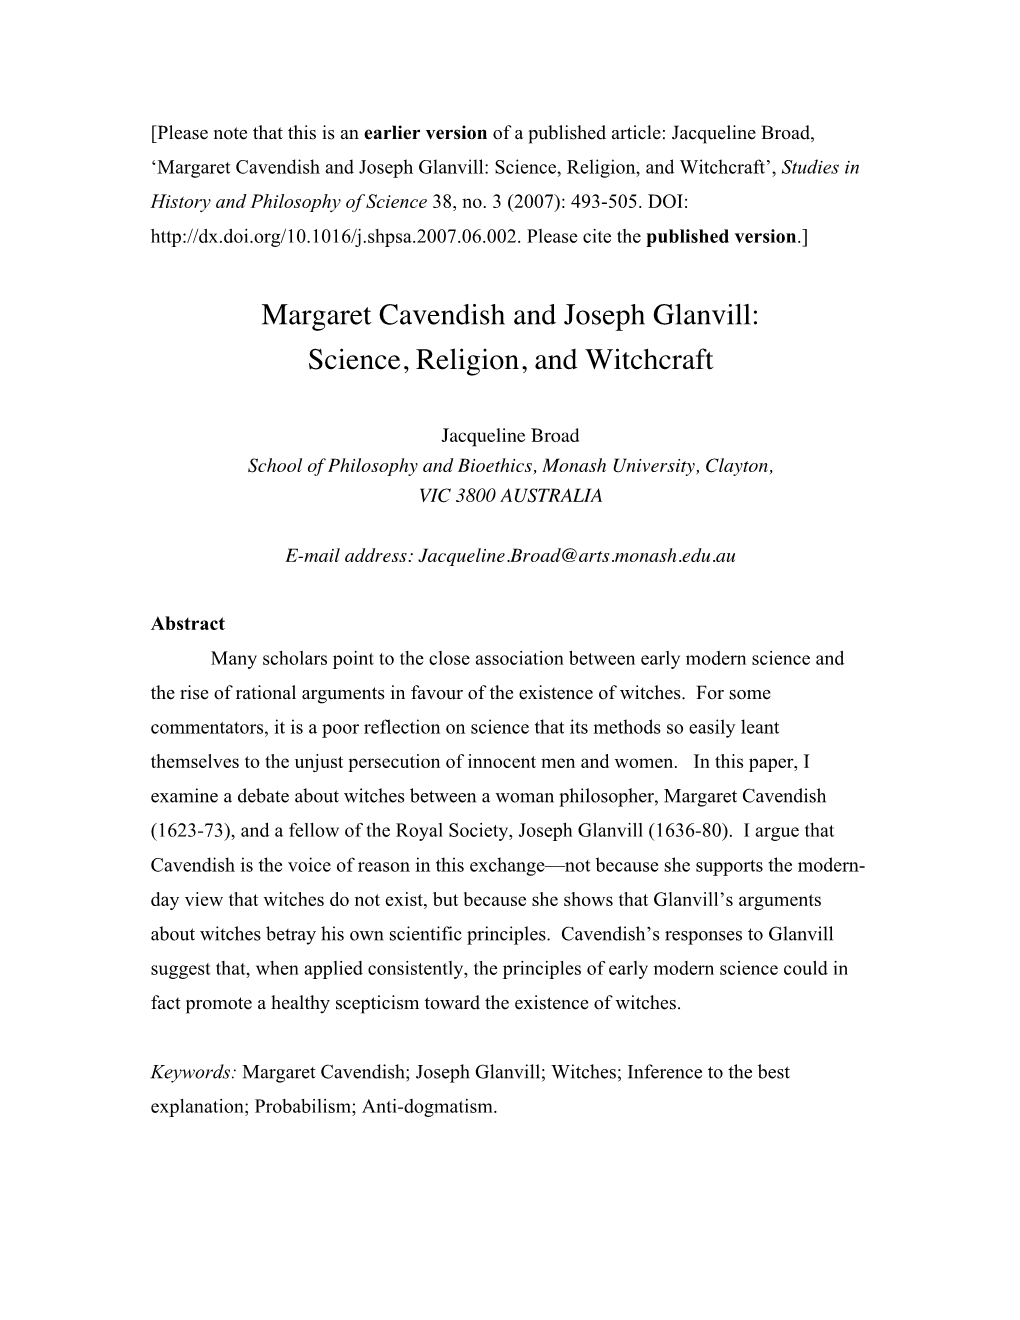 Margaret Cavendish and Joseph Glanvill: Science, Religion, and Witchcraft’, Studies in History and Philosophy of Science 38, No